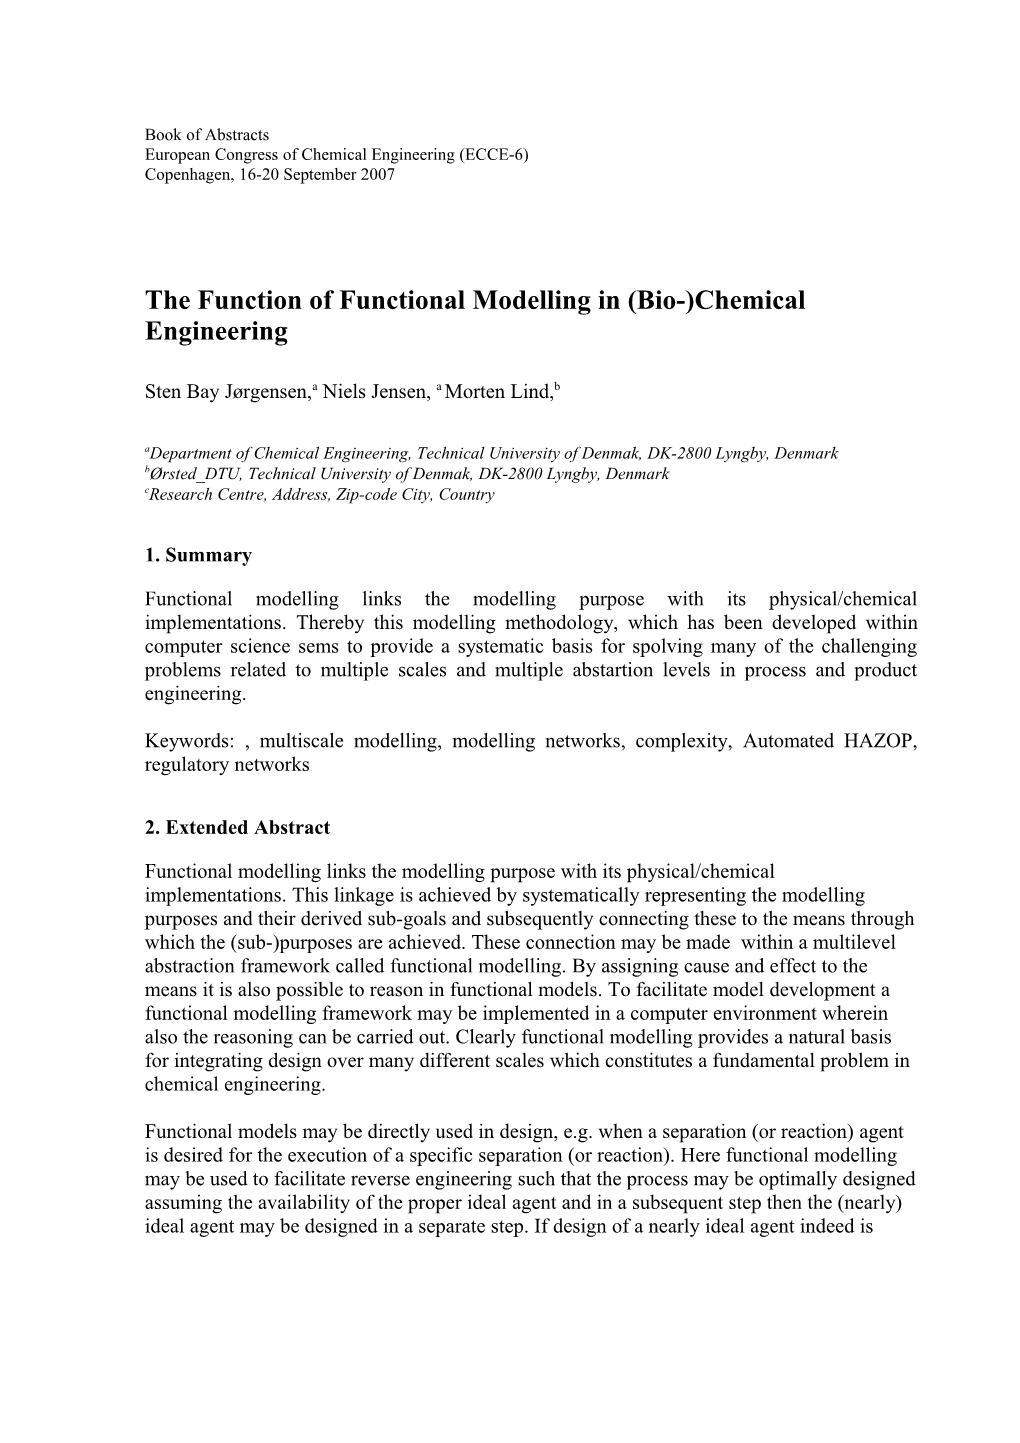 The Function of Functional Modelling in (Bio-)Chemical Engineering